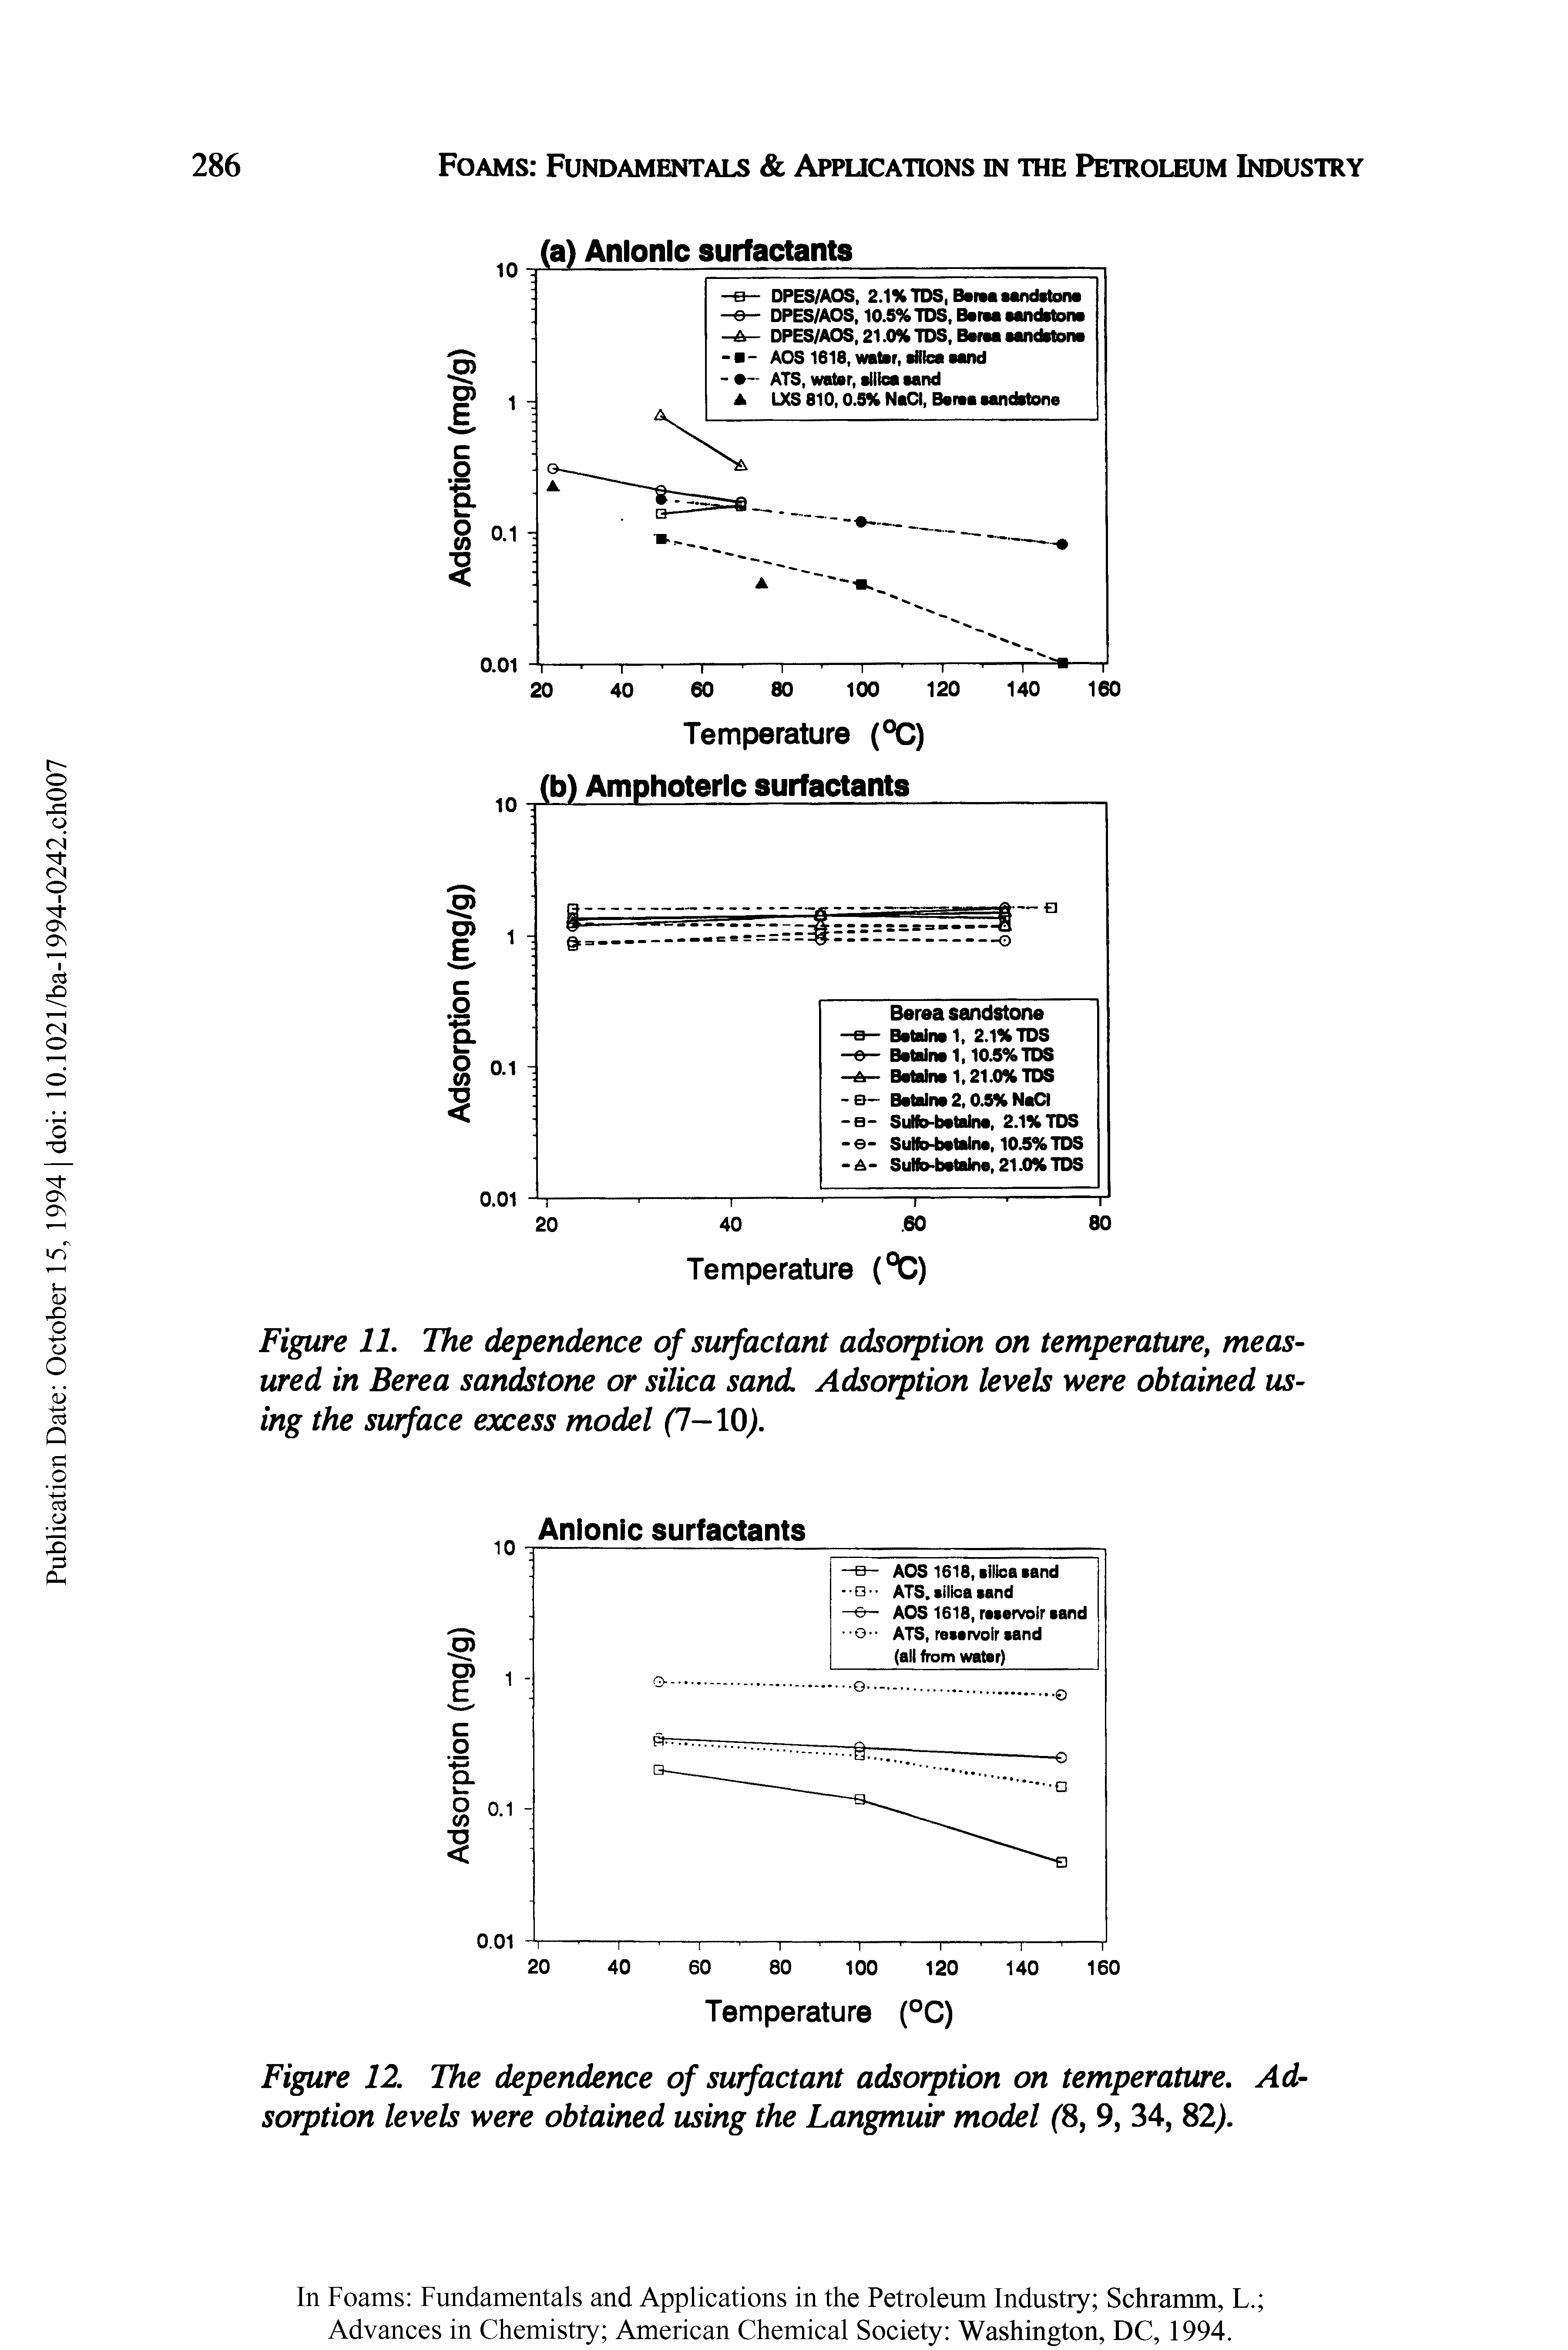 Figure 11. The dependence of surfactant adsorption on temperature, measured in Berea sandstone or silica sand. Adsorption levels were obtained using the surface excess model (1—10).